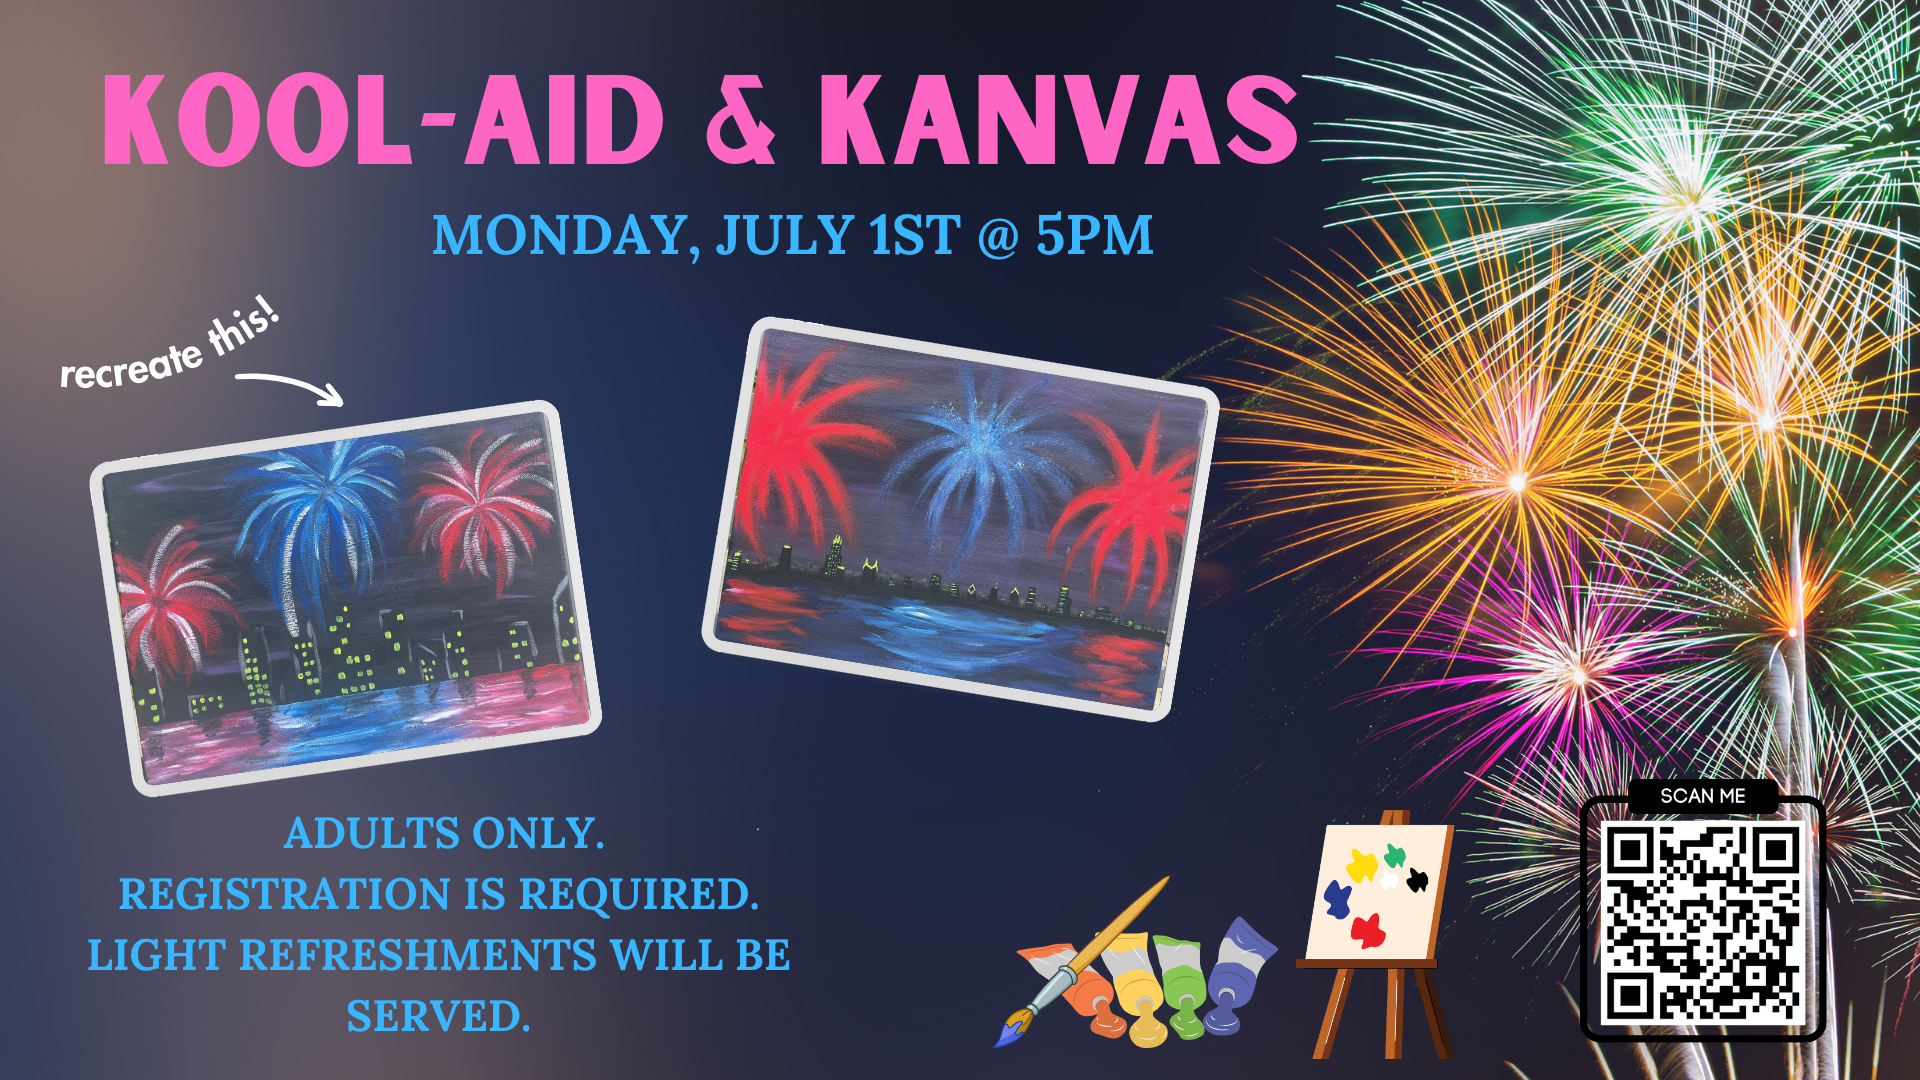 Kool-Aid & Canvas for Adults, Monday, July 1 at 5:00 pm. Registration required